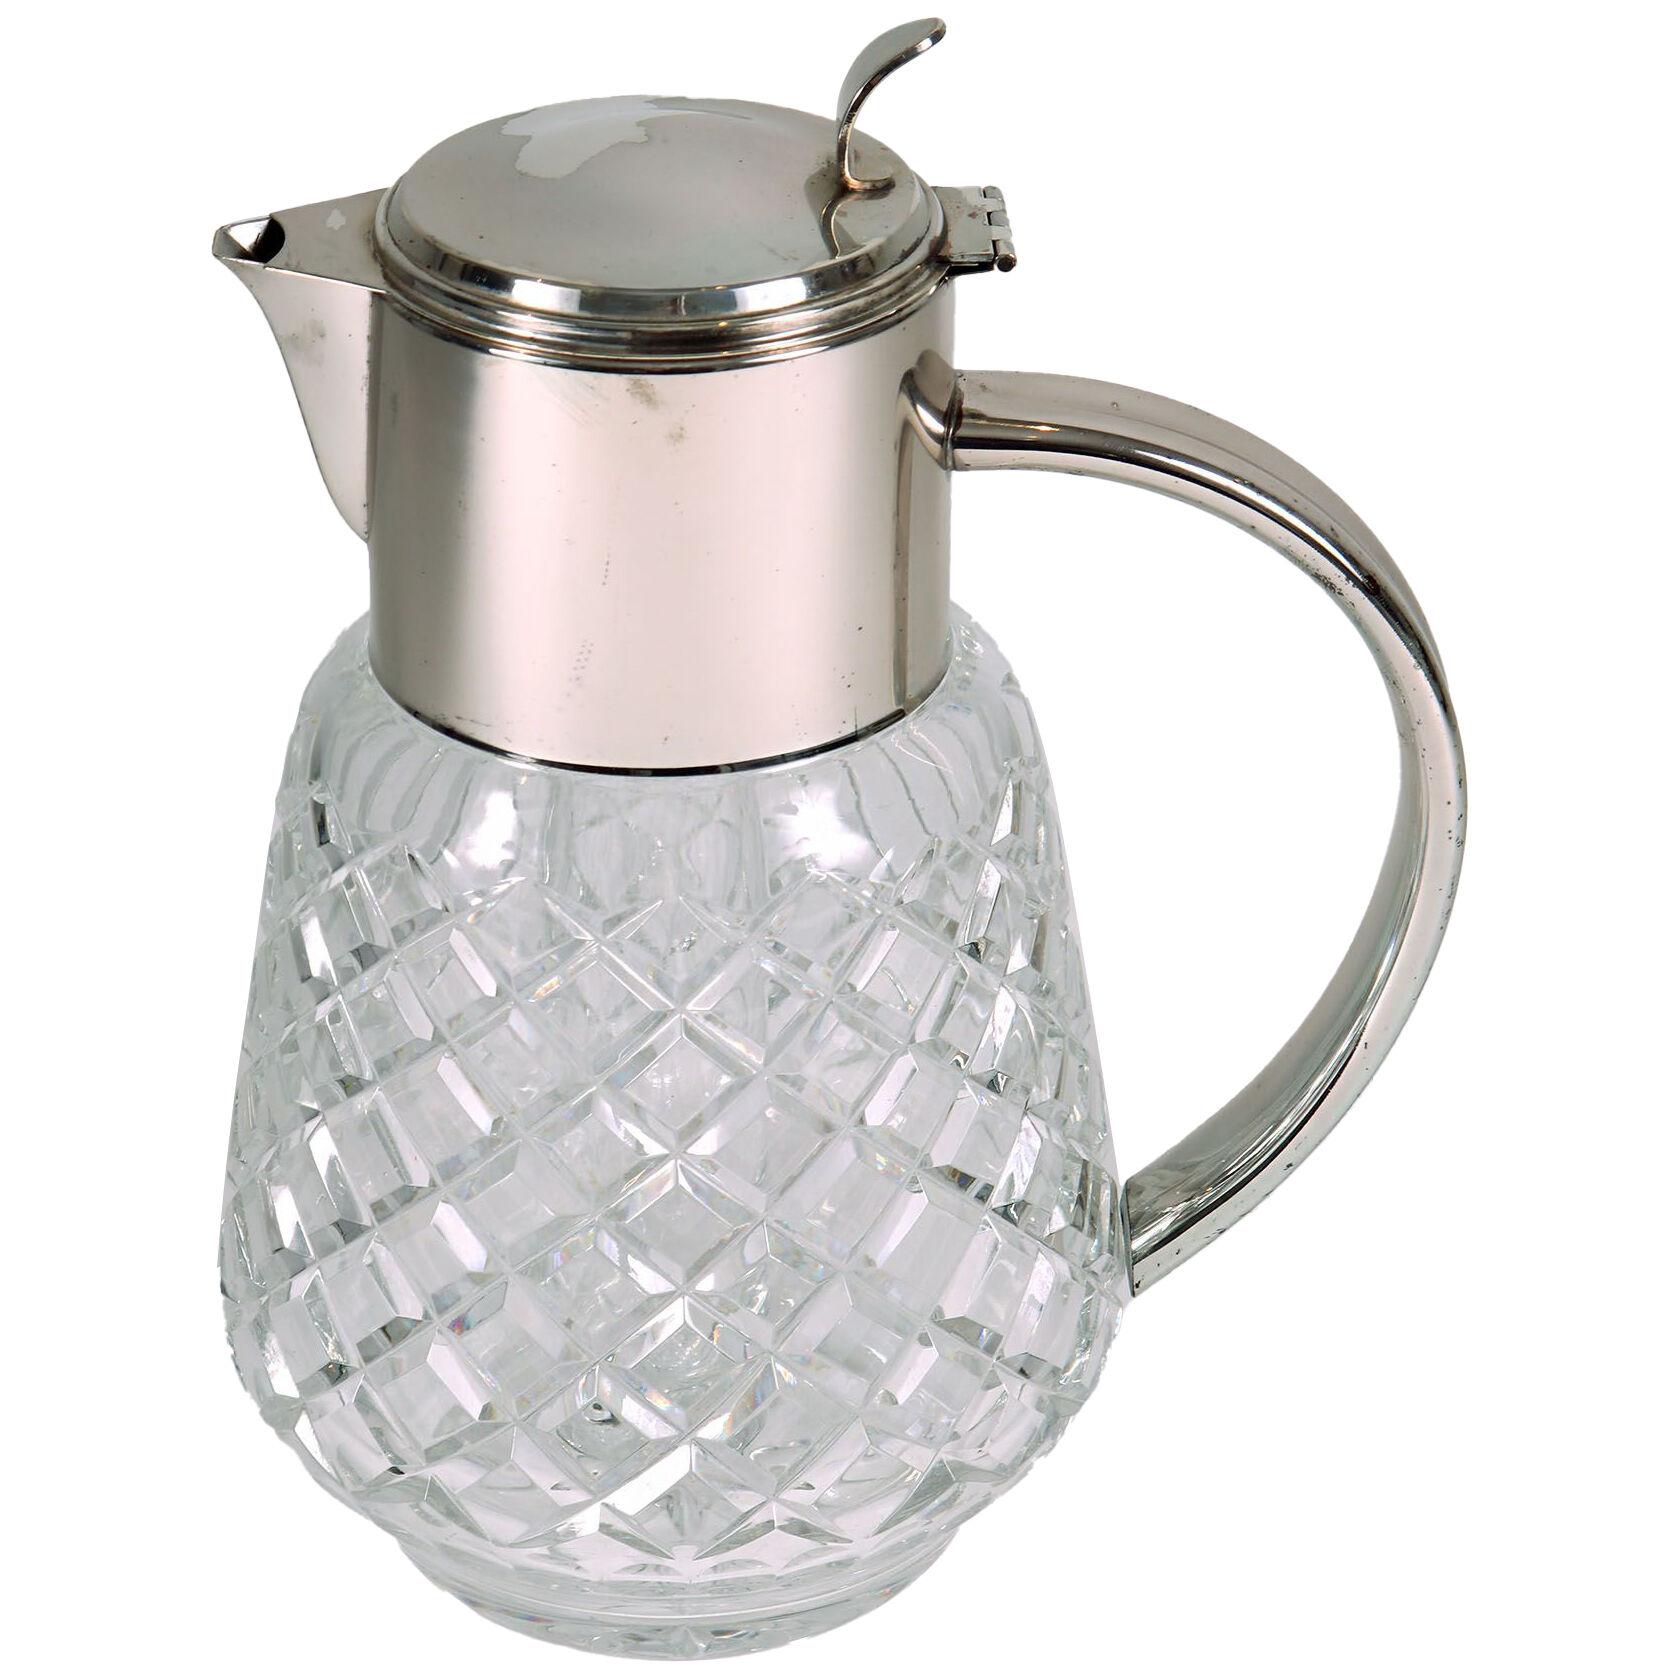 An early 20th century silver plated and cut glass serving jug